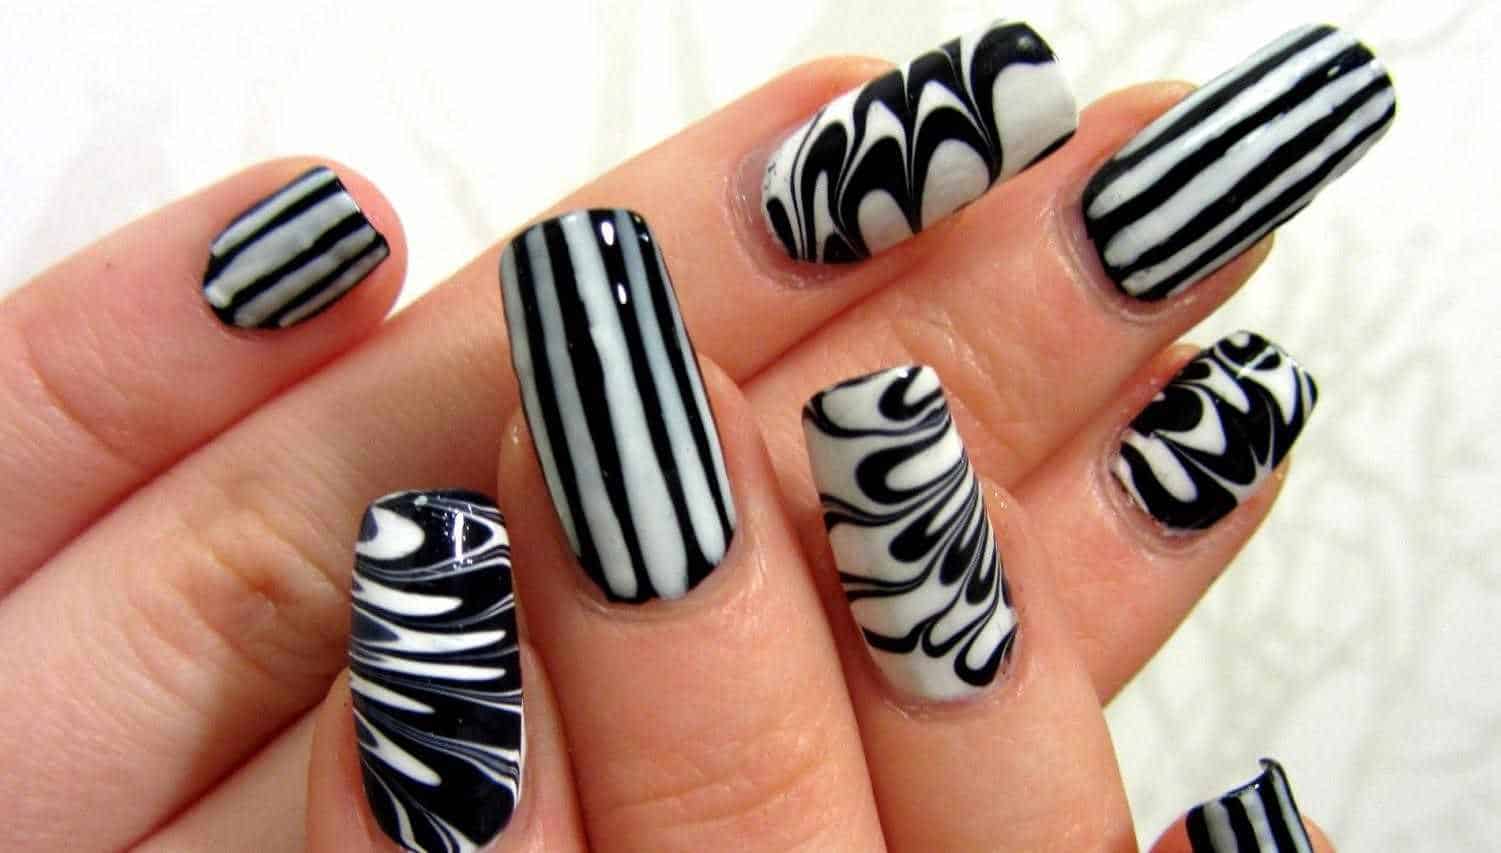 7. Toothpick Nail Art Techniques - wide 4